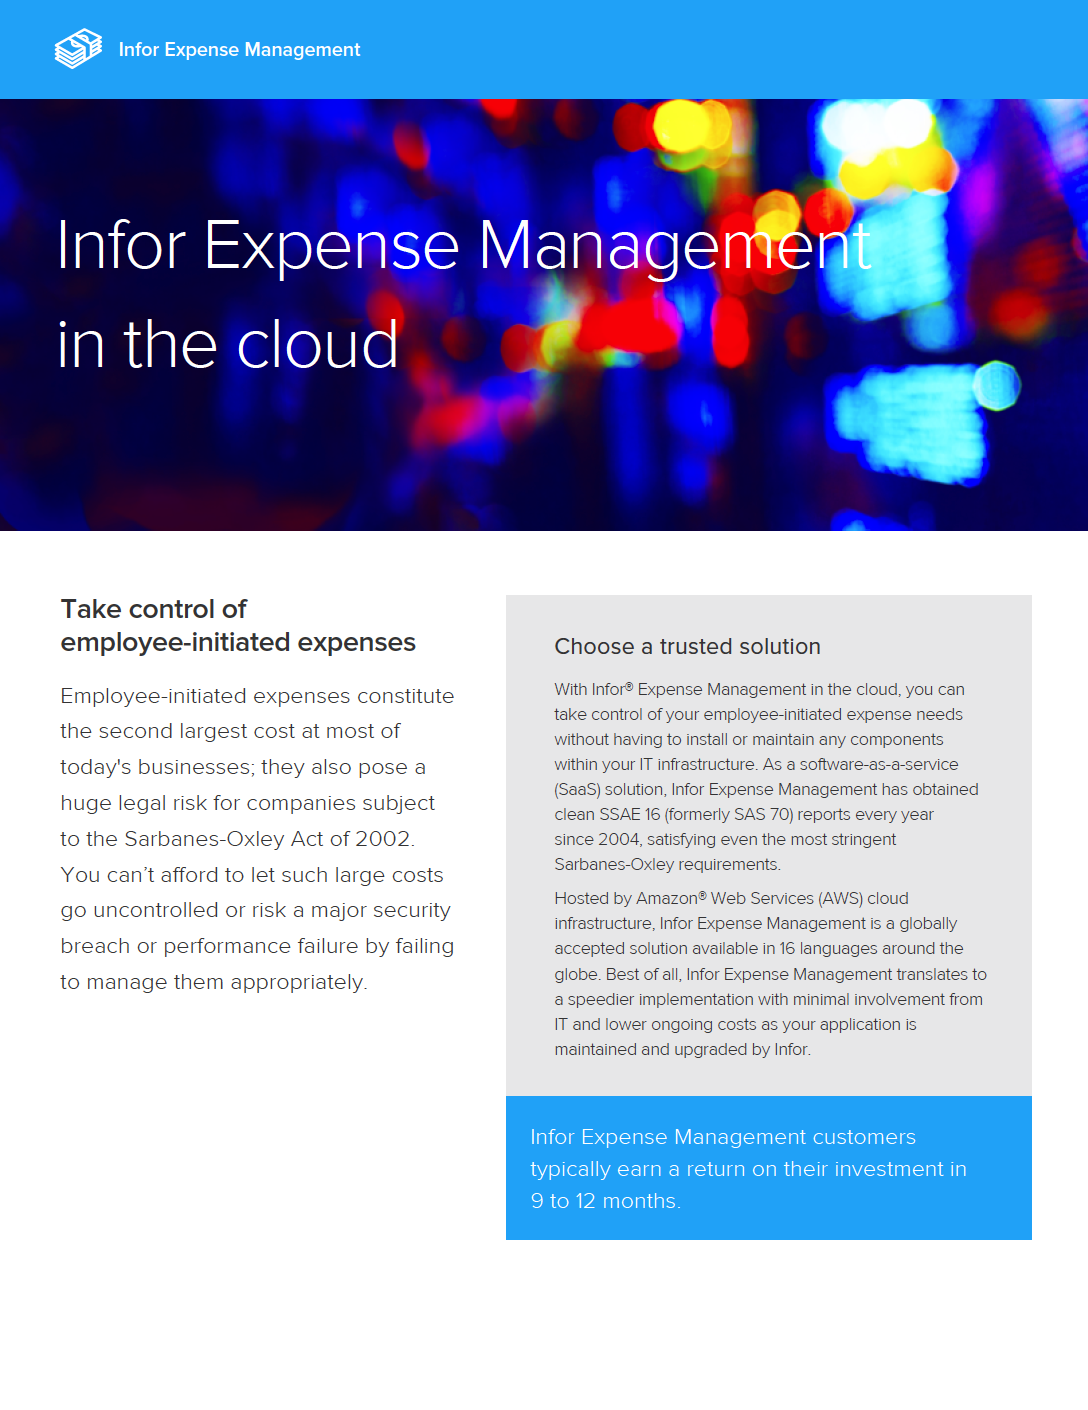 Infor Expense Management in the Cloud